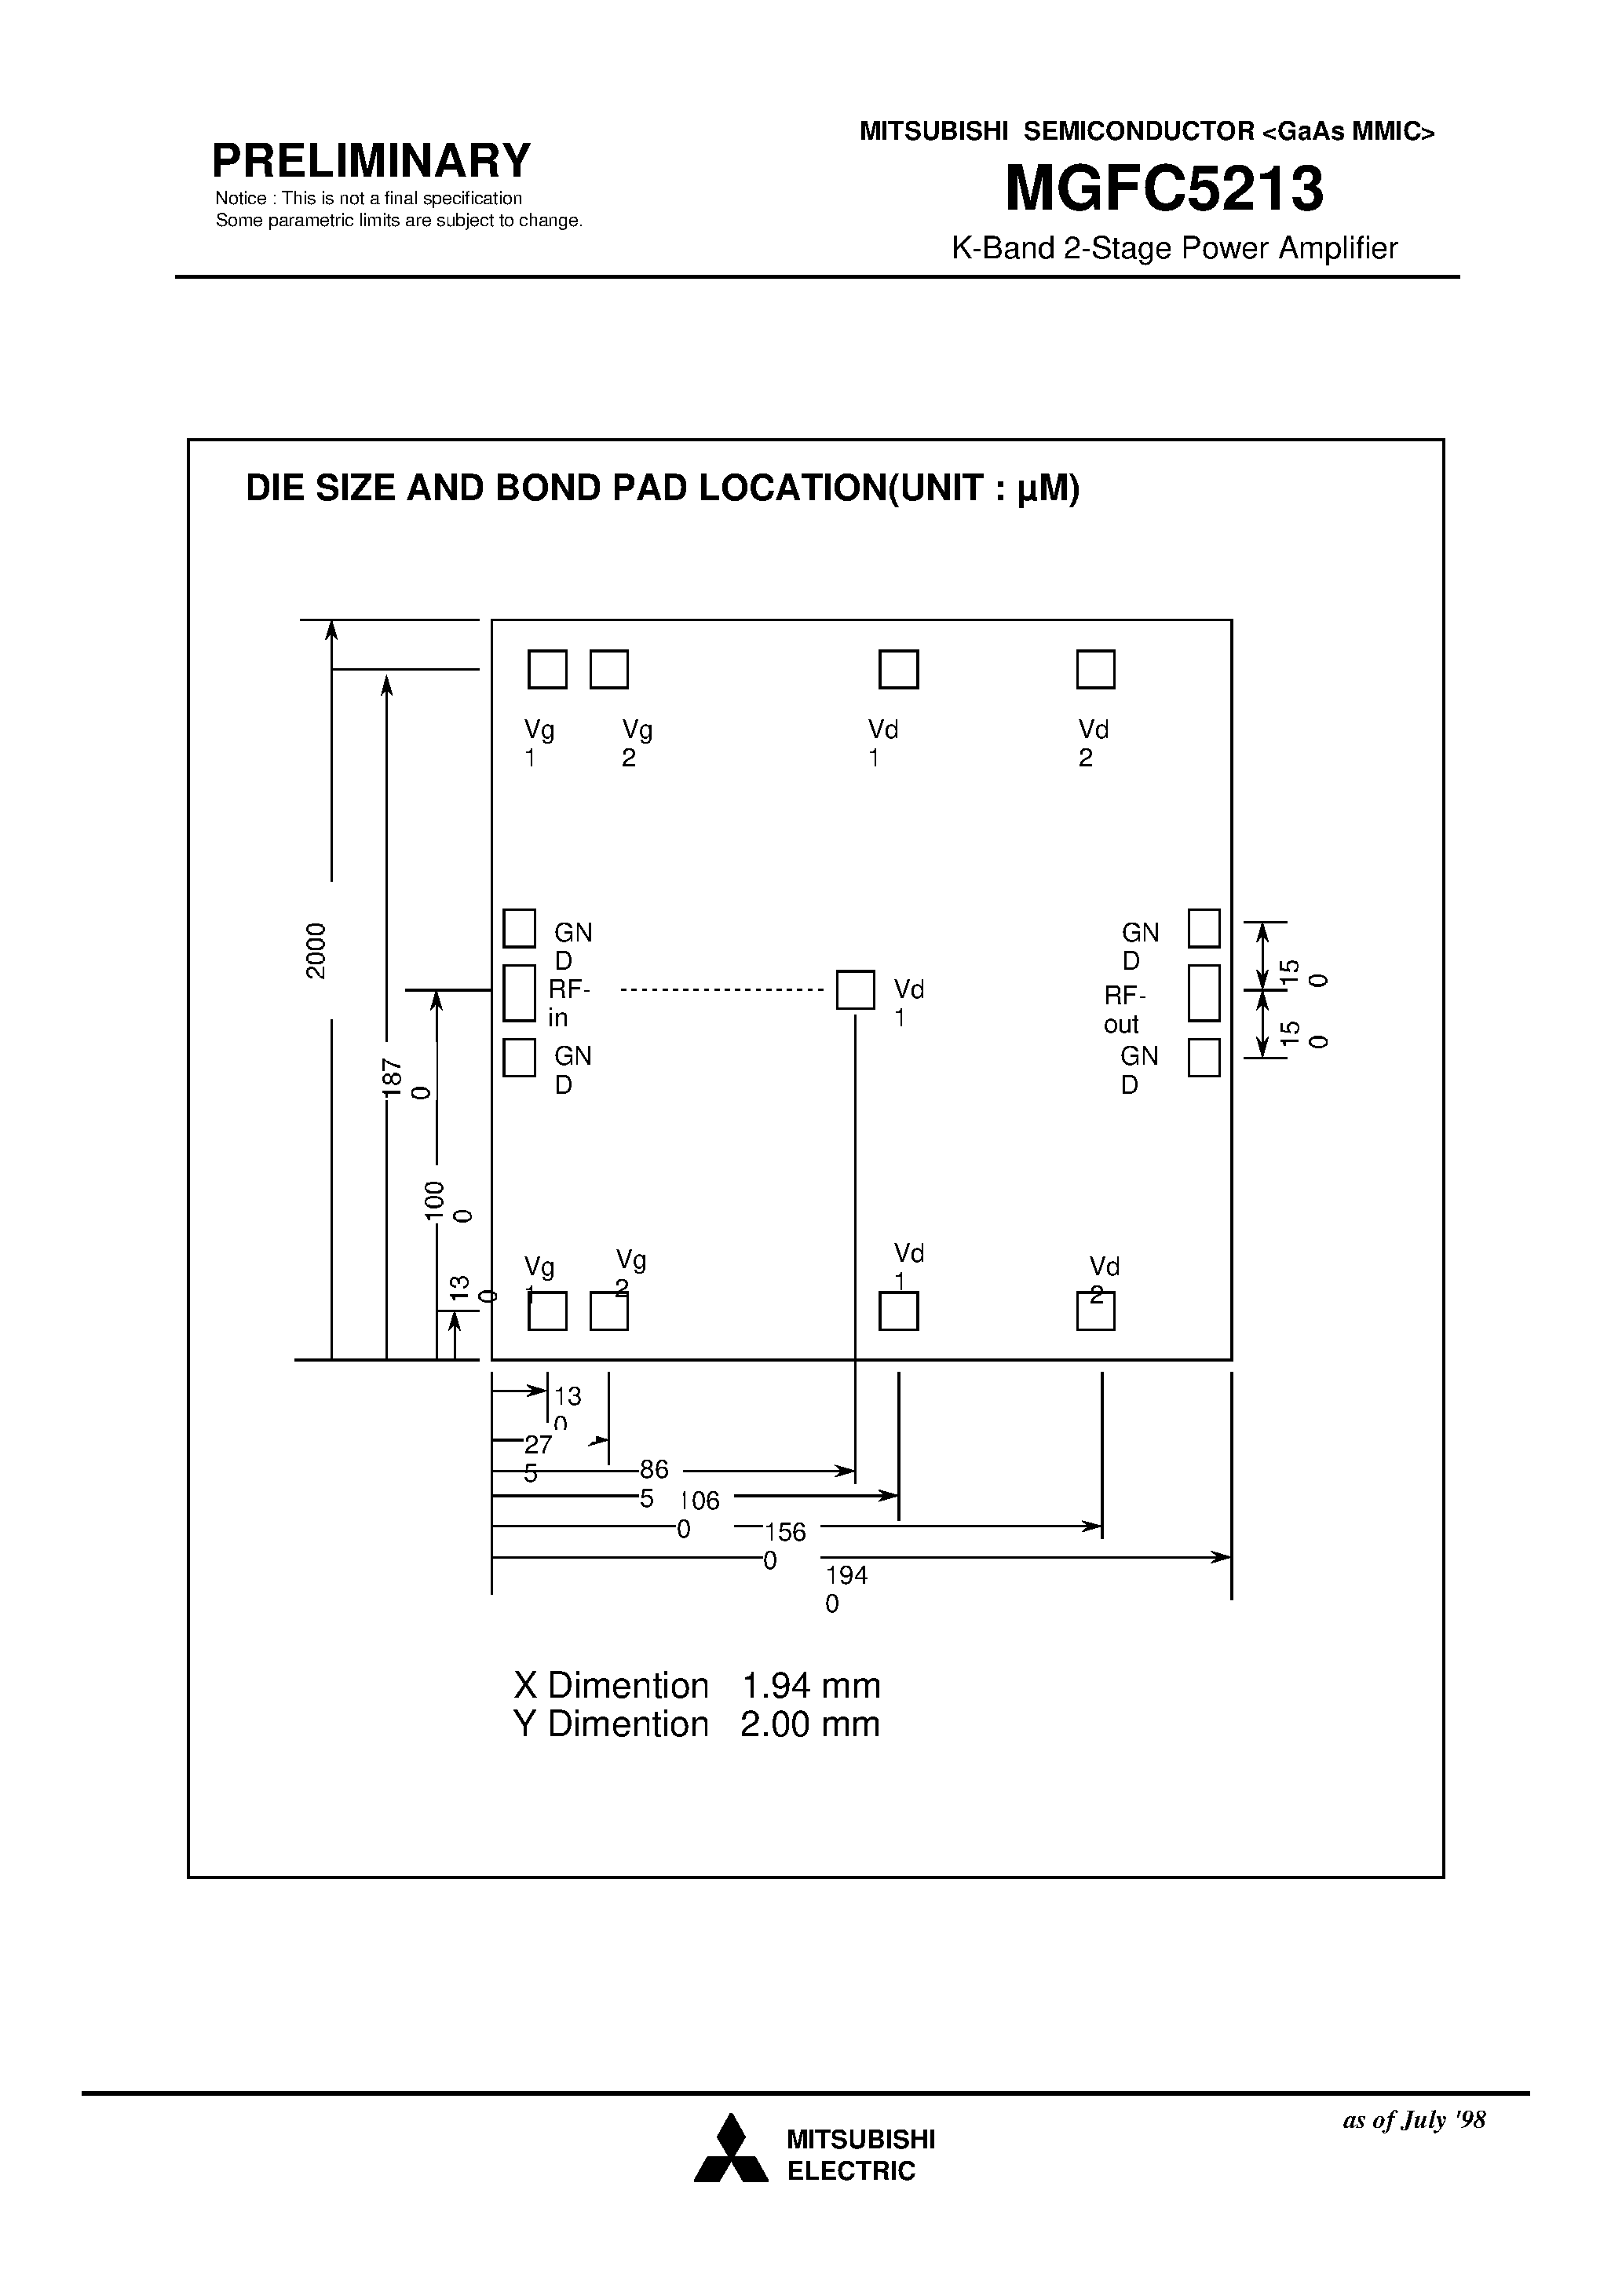 Datasheet MGFC5213 - K-Band 2-Stage Power Amplifier page 2